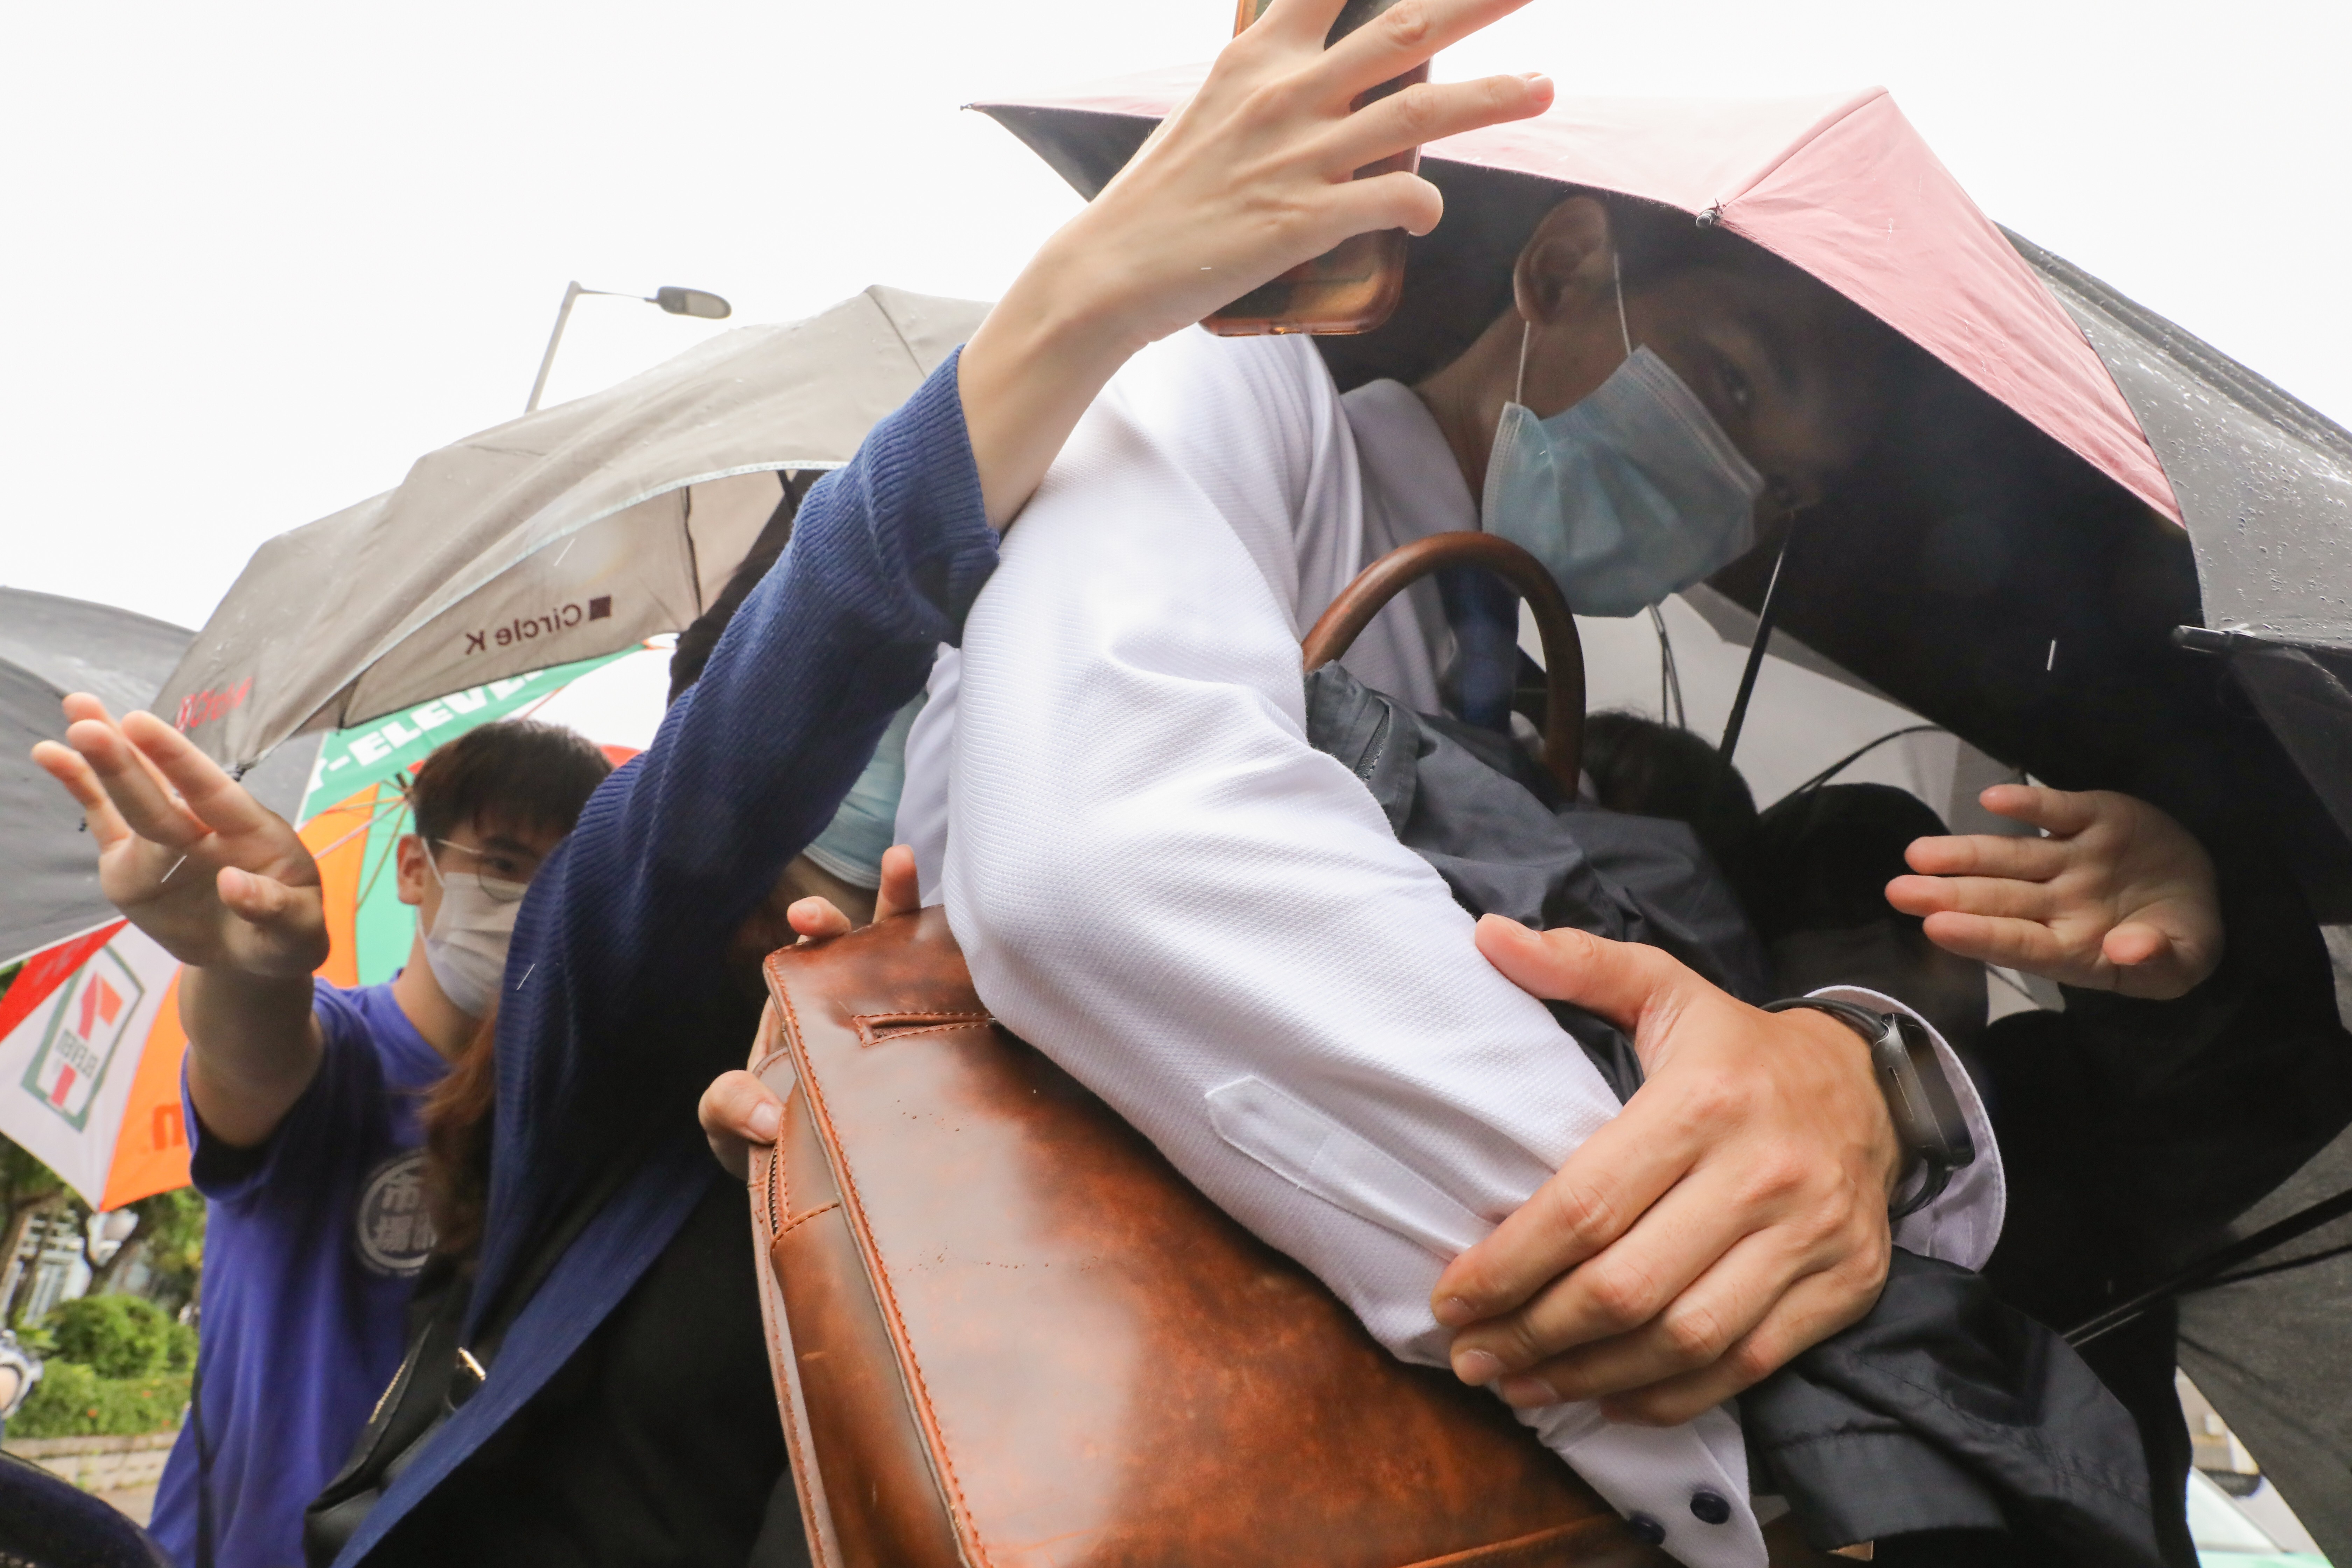 Yeung Pok-man leaves Fanling Court after being sentenced. Photo: K.Y. Cheng